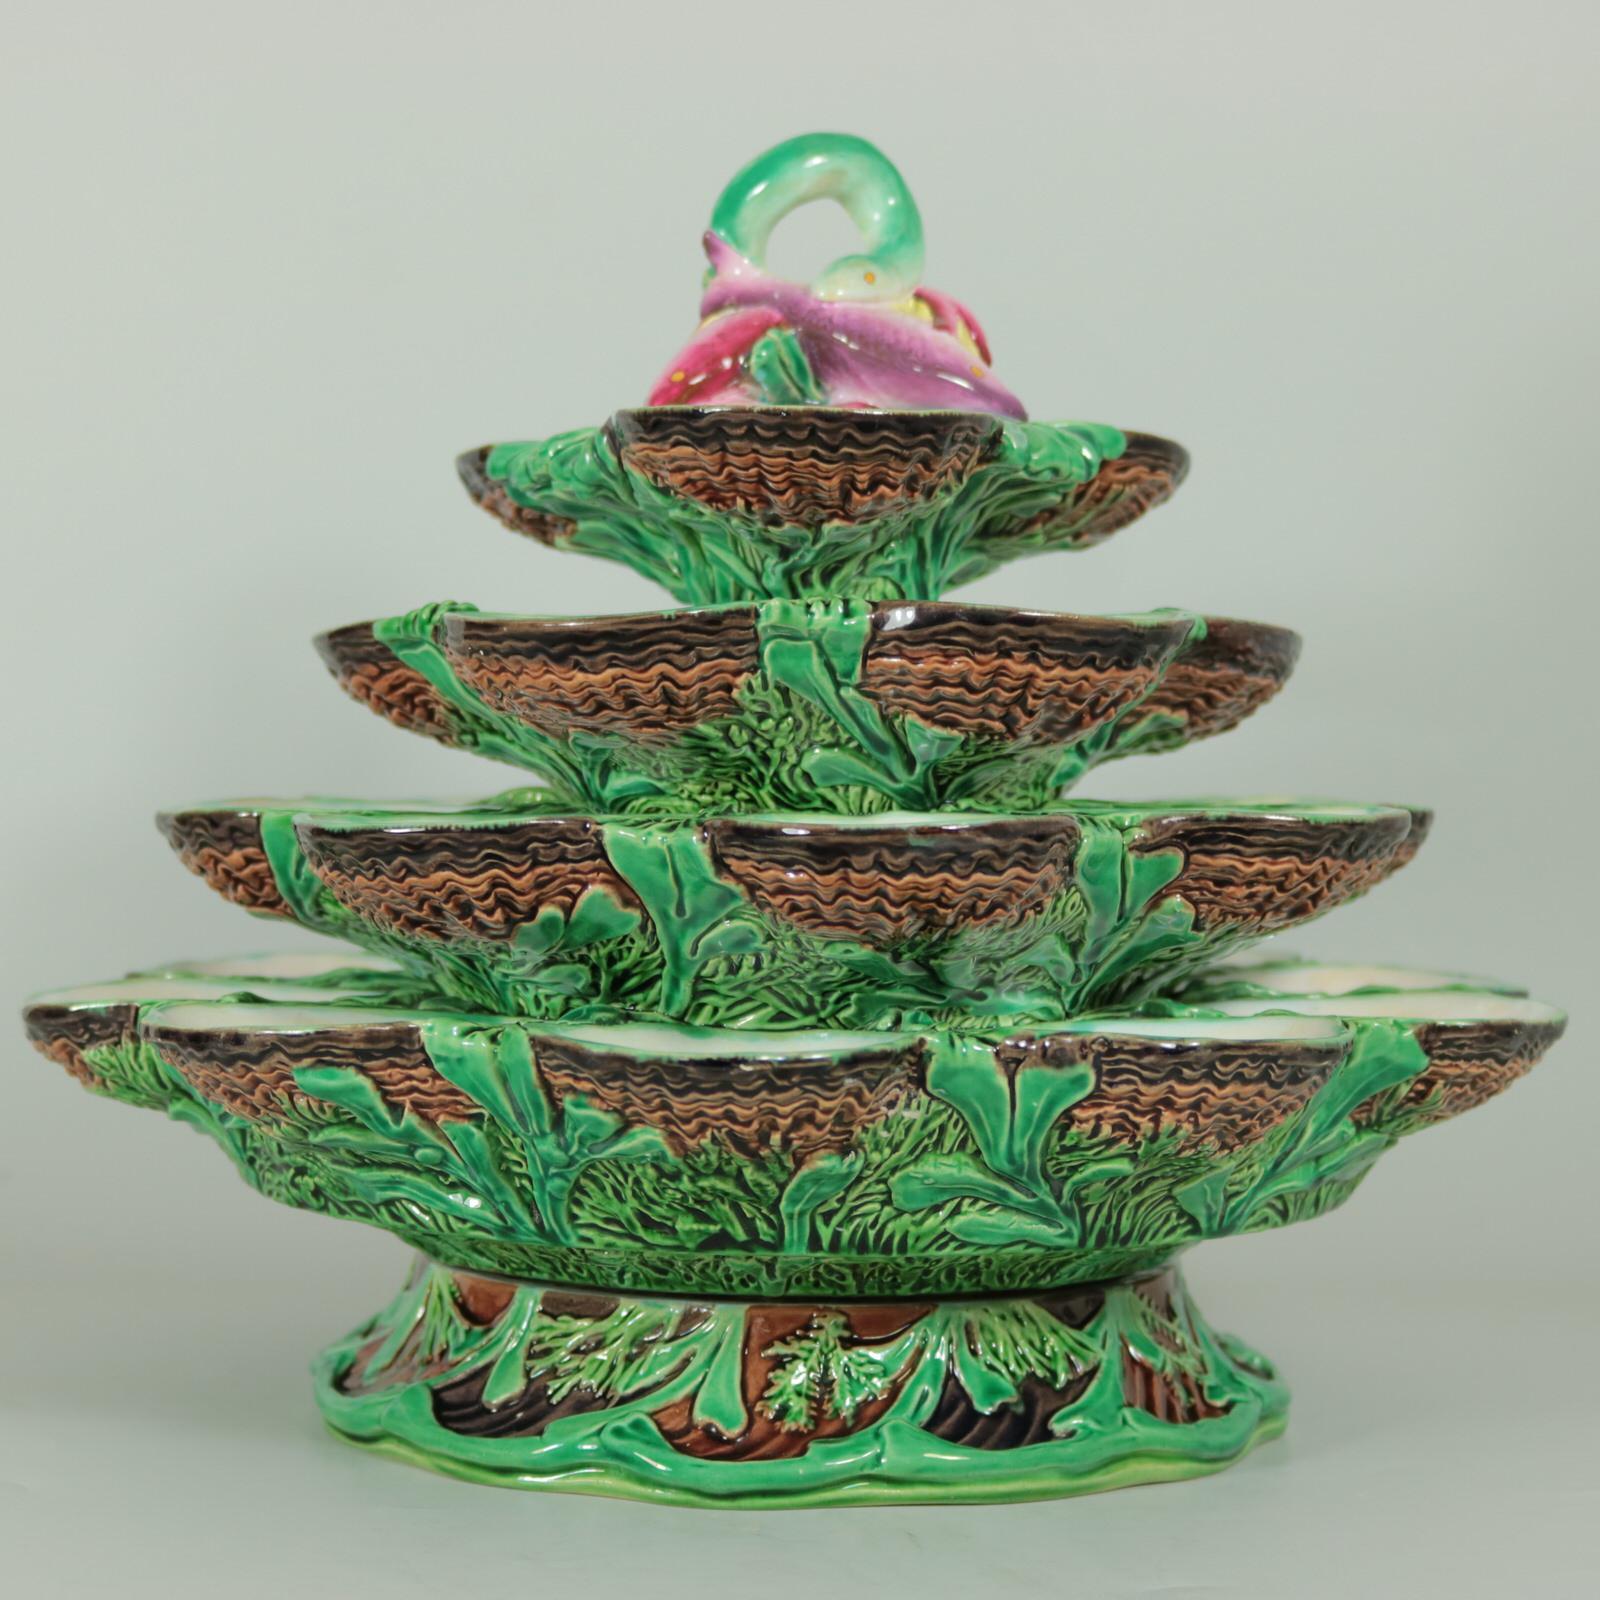 Minton Majolica oyster stand which features four tiers of open oyster shells, laid on seaweed. A fish and eel handle at the top. Rotates on the base. Colouration: green, white, brown, are predominant. Bears a monogram mark, 'CB'.